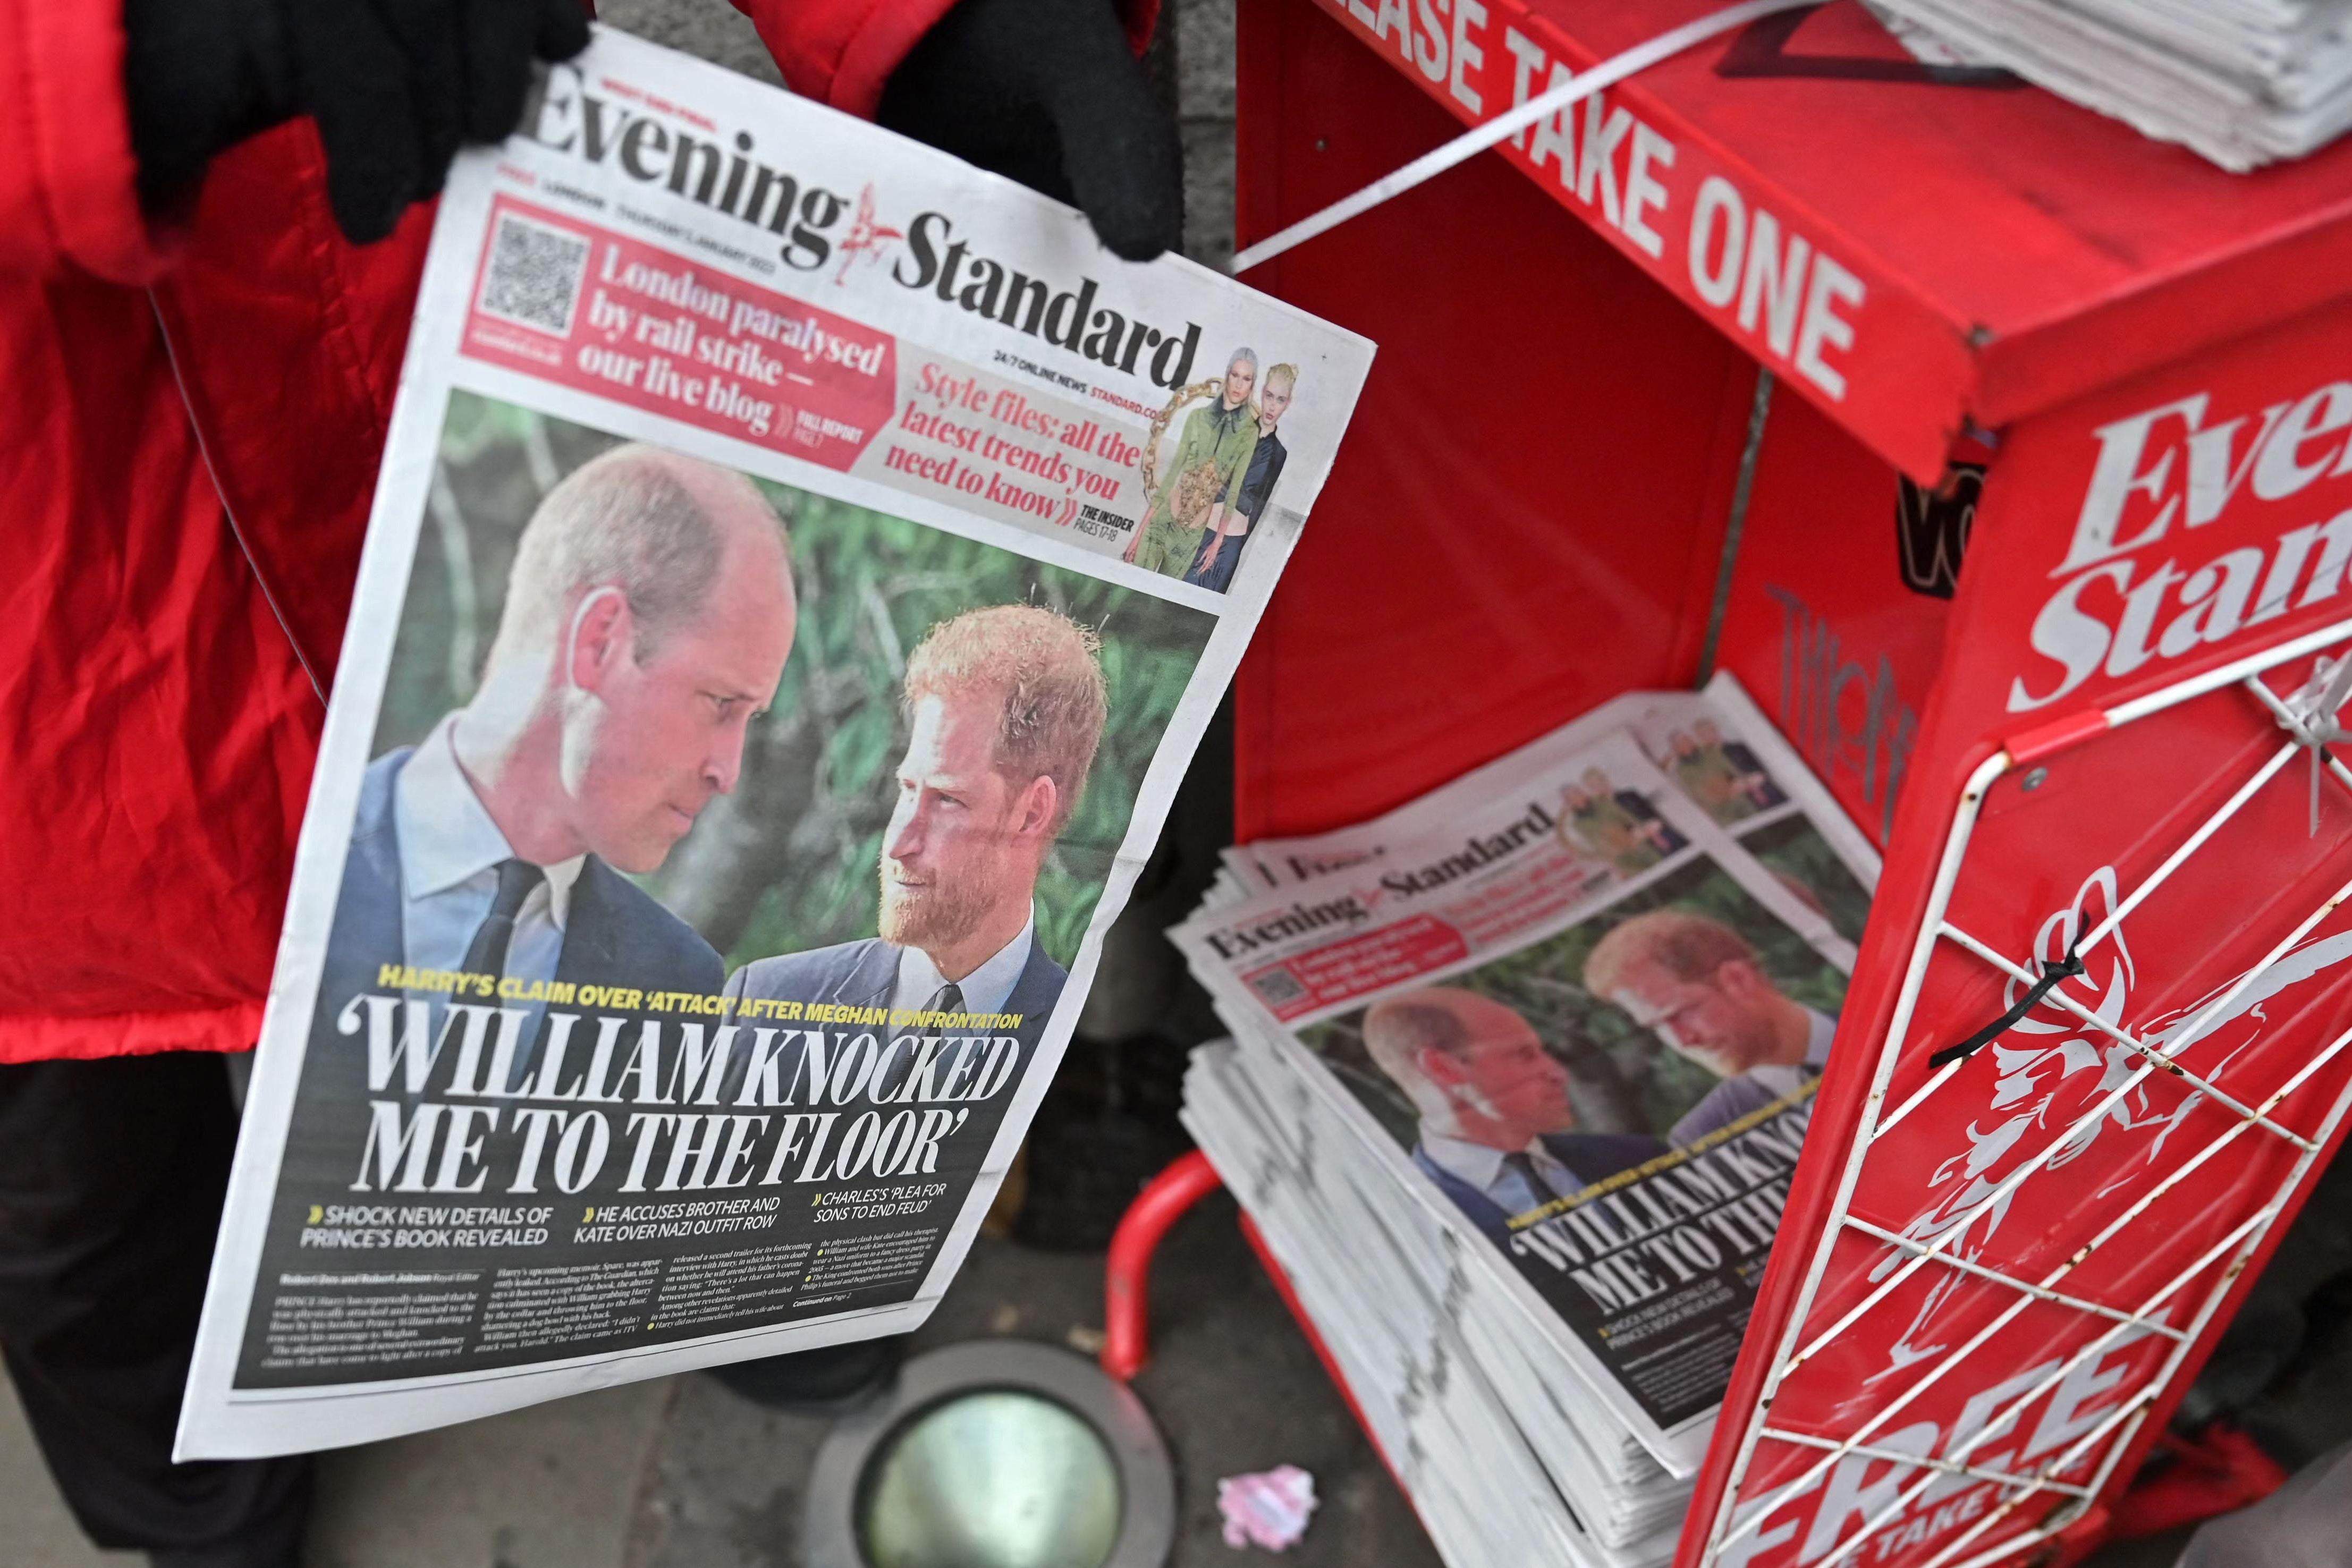 Copies of the Evening Standard newspaper, leading with stories about Britain's Prince Harry, Duke of Sussex's relationship with Britain's Prince William, Prince of Wales, are placed out for distribution, in London on January 5, 2023, ahead of the publication of Britain's Prince Harry, Duke of Sussex's book, Spare. - Britain's Prince Harry recounts in his new book how he was physically "attacked" by his older brother Prince William during an argument in 2019, the Guardian reported on January 4, 2023. (Photo by JUSTIN TALLIS / AFP) (Photo by JUSTIN TALLIS/AFP via Getty Images)